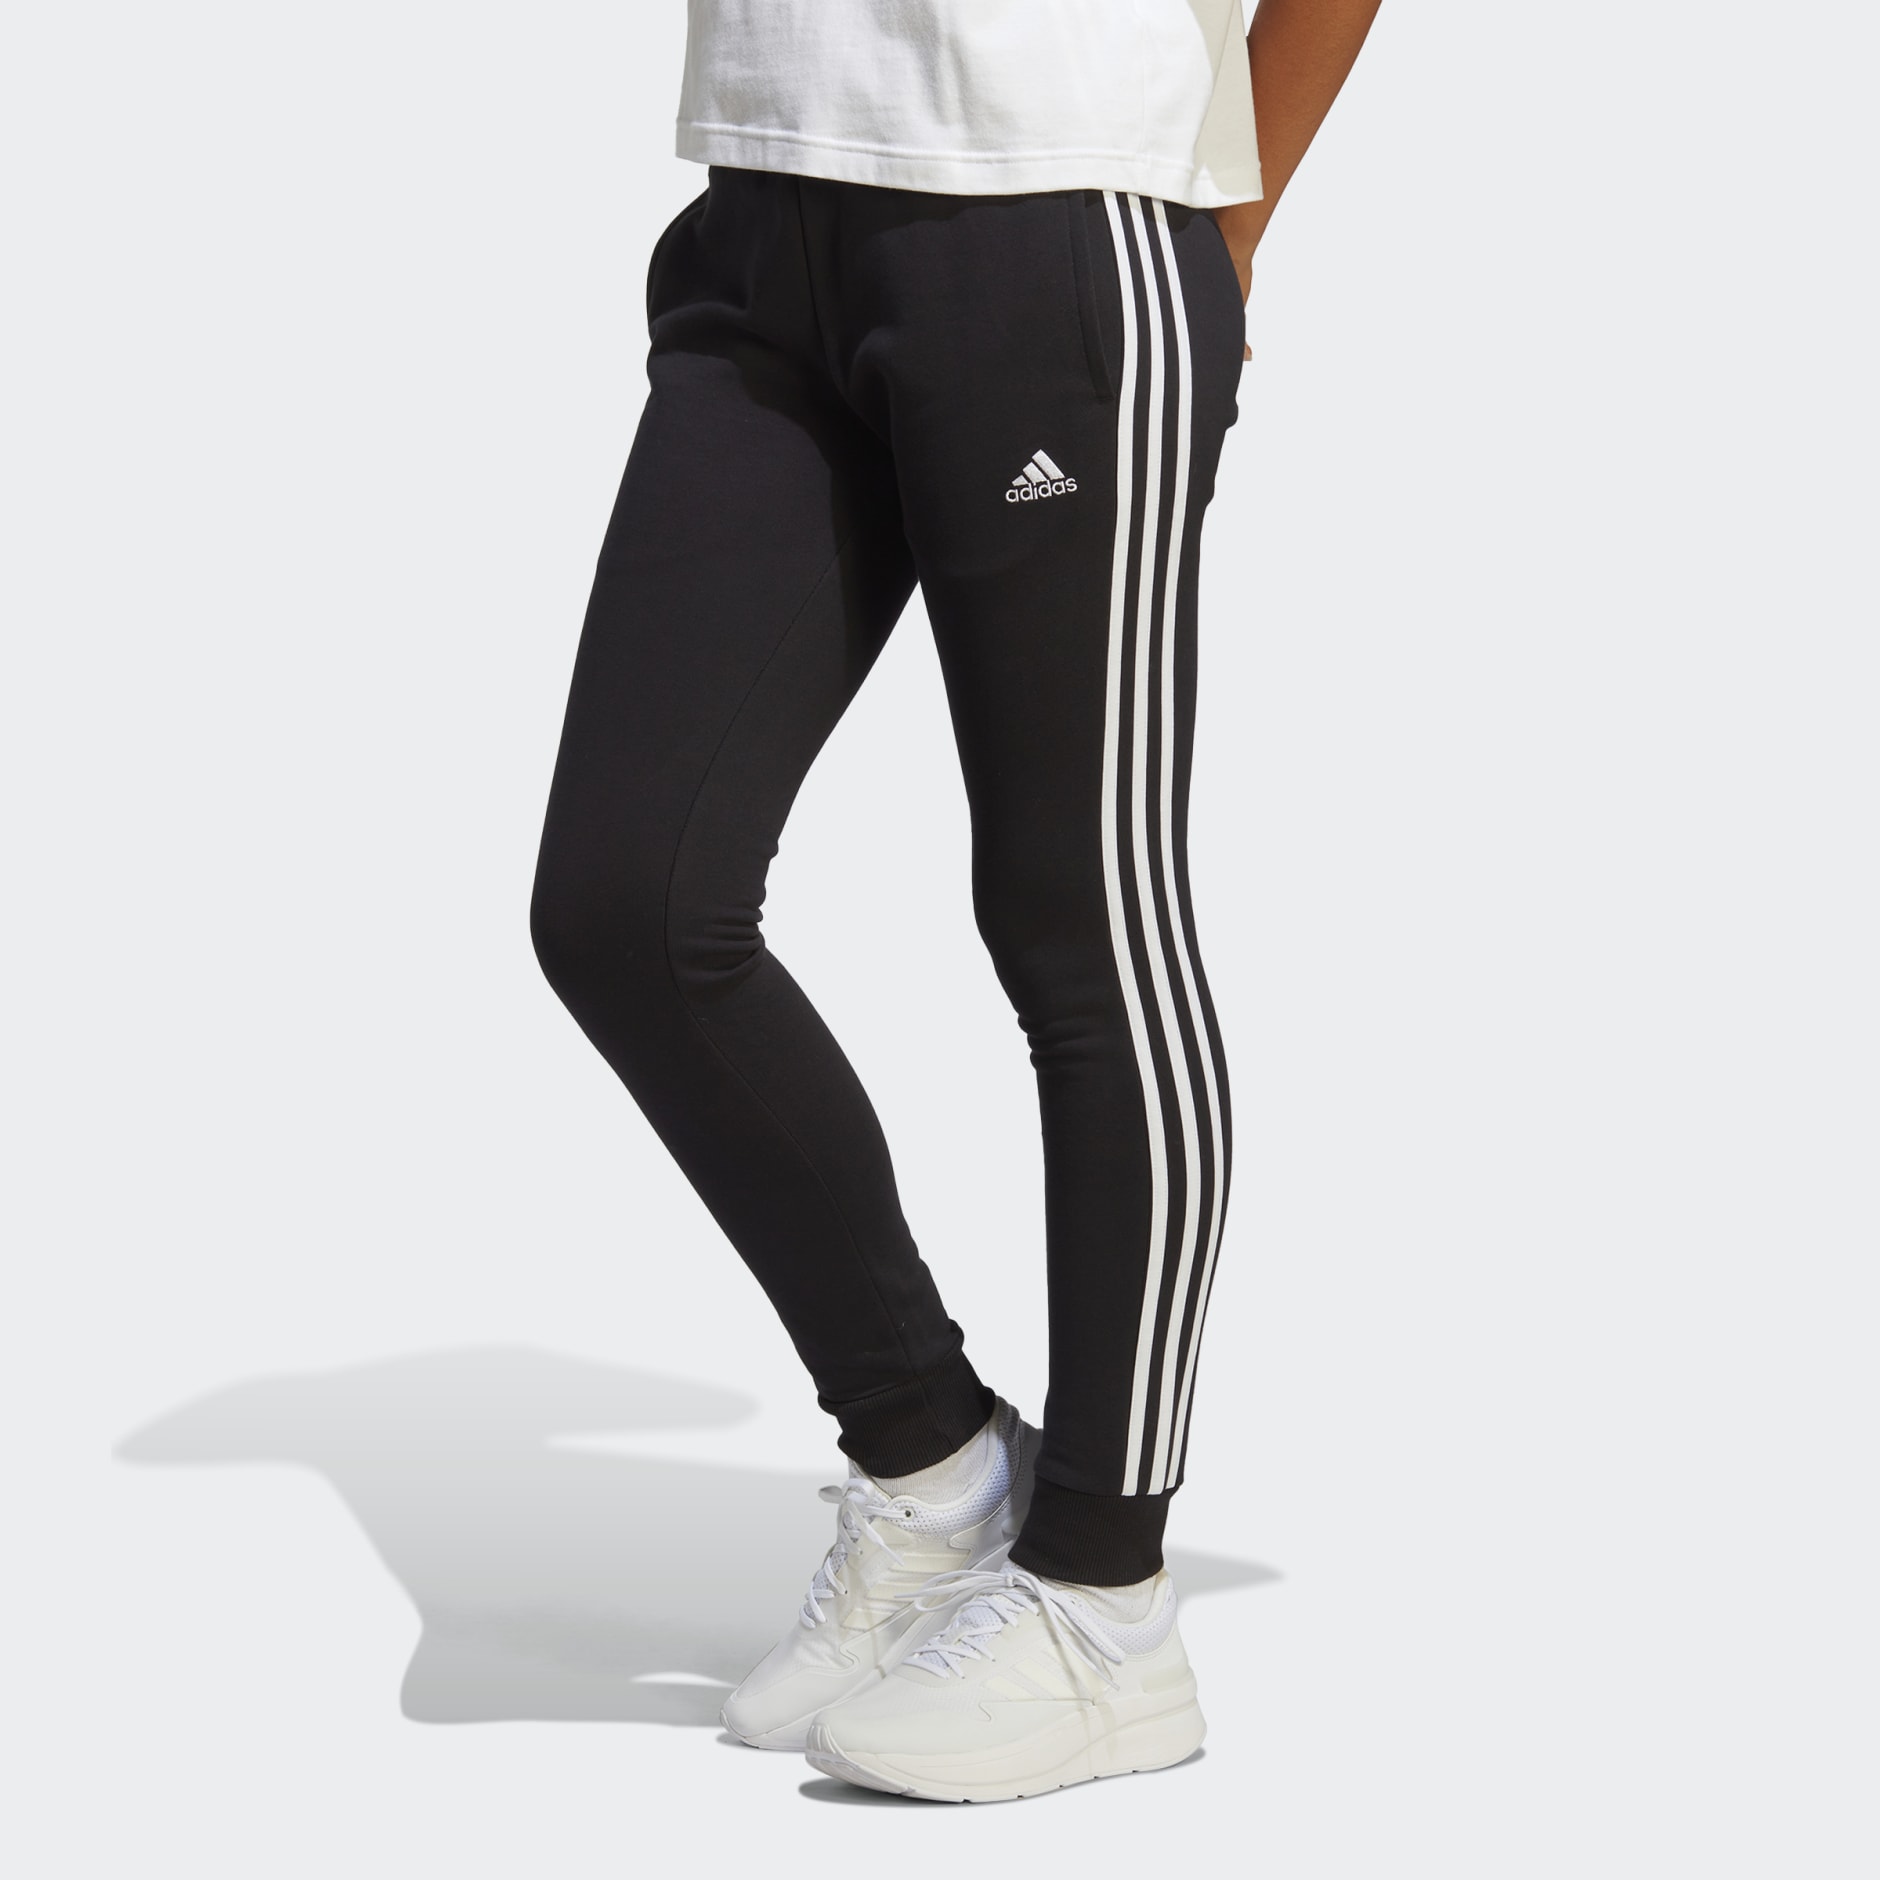 adidas Essentials 3-Stripes French Terry Cuffed Pants - Black, Women's  Lifestyle